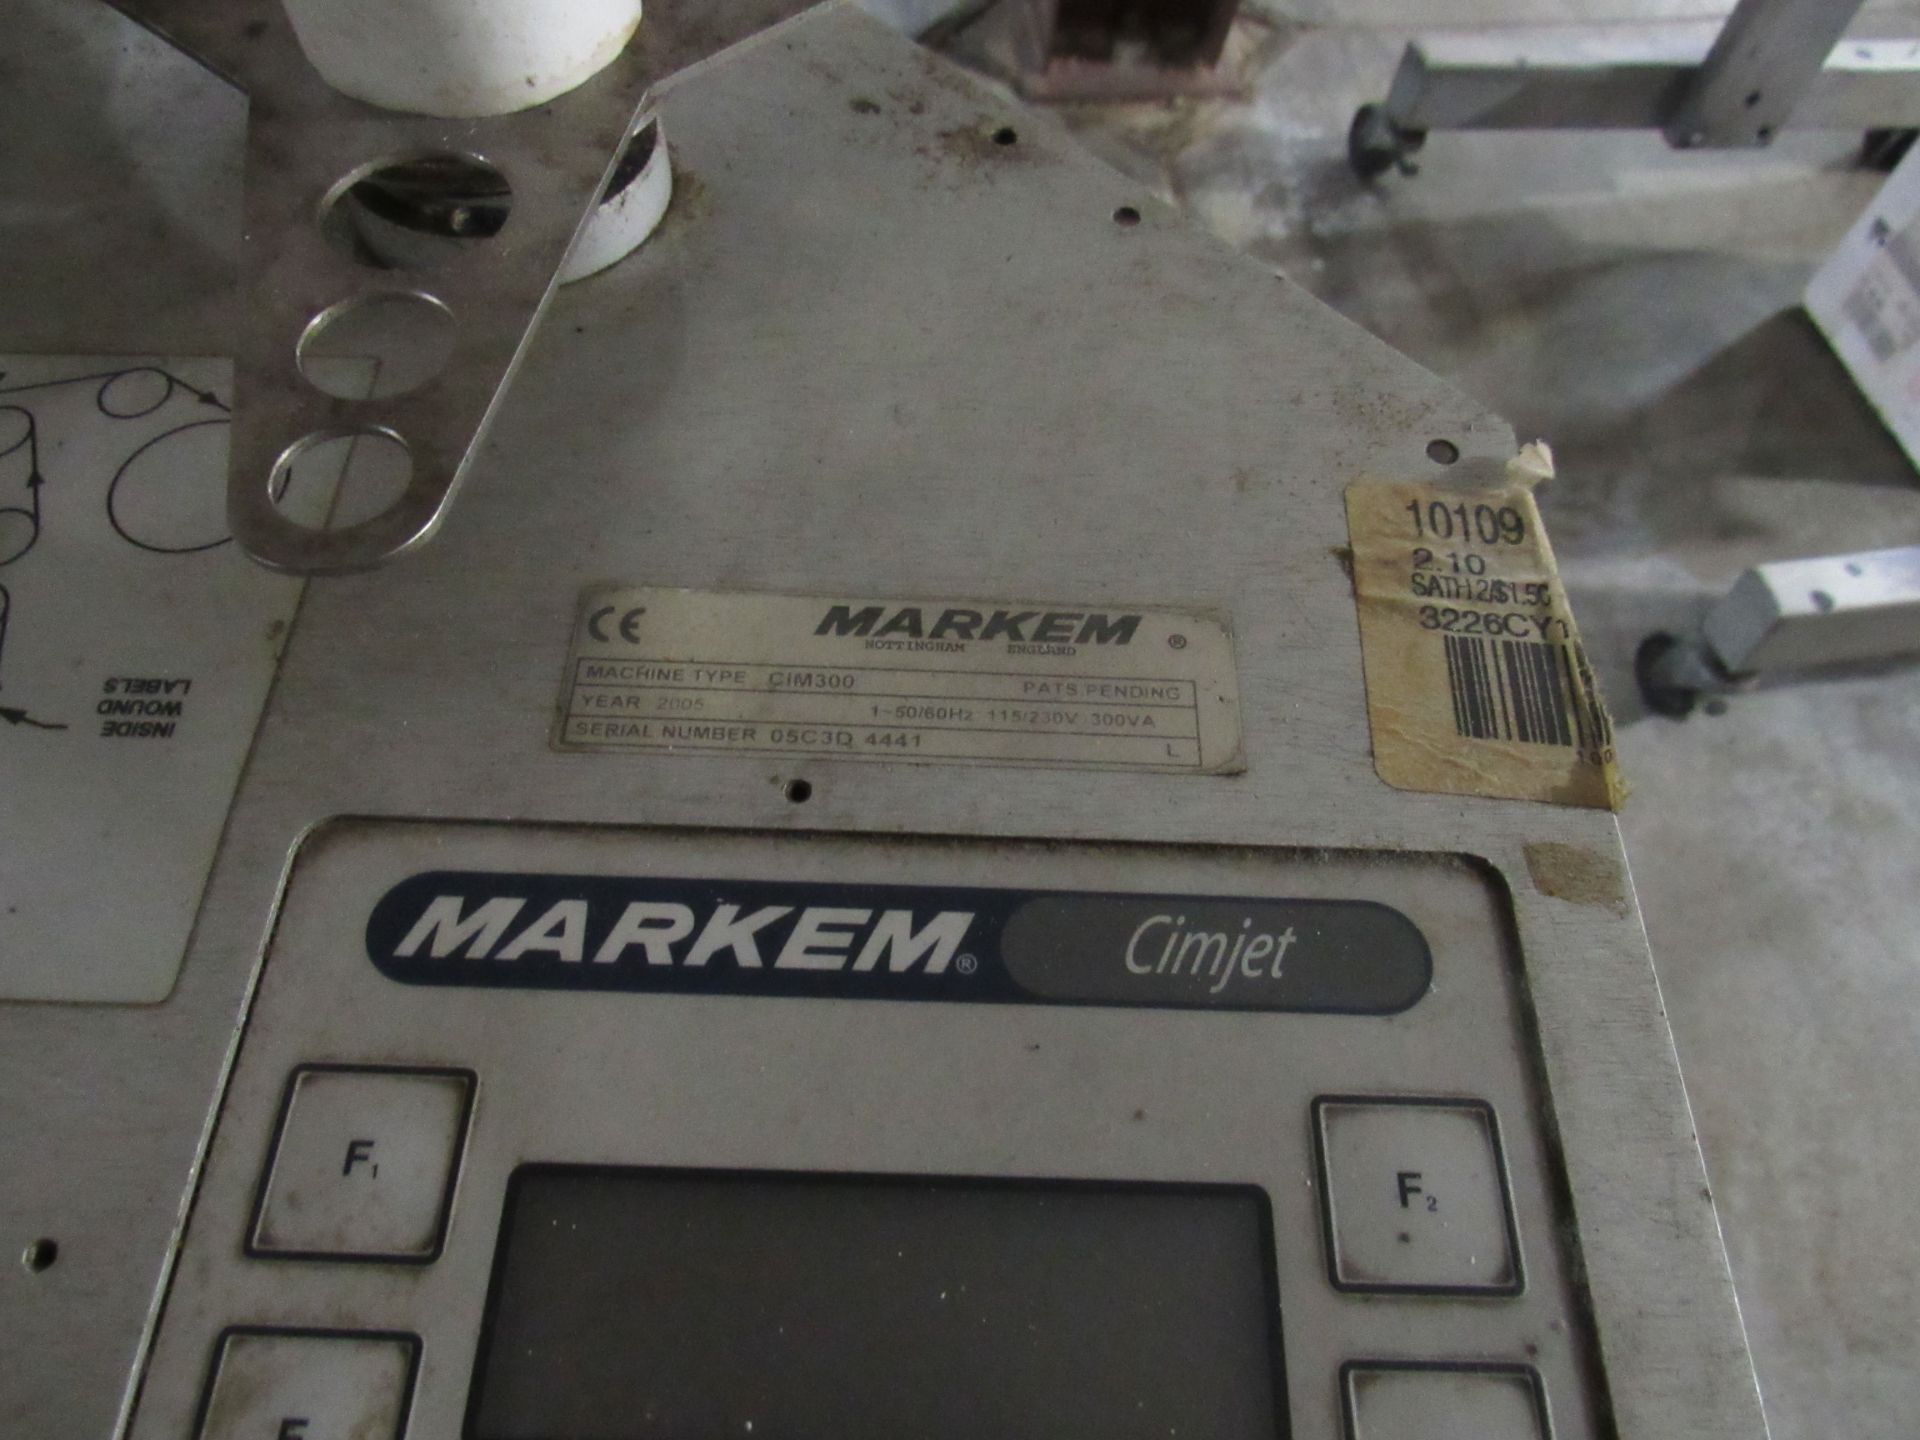 Markem CE Label Printer, Label Applicator used for labeling boxes, on Tripod Base with Casters. Free - Image 3 of 8